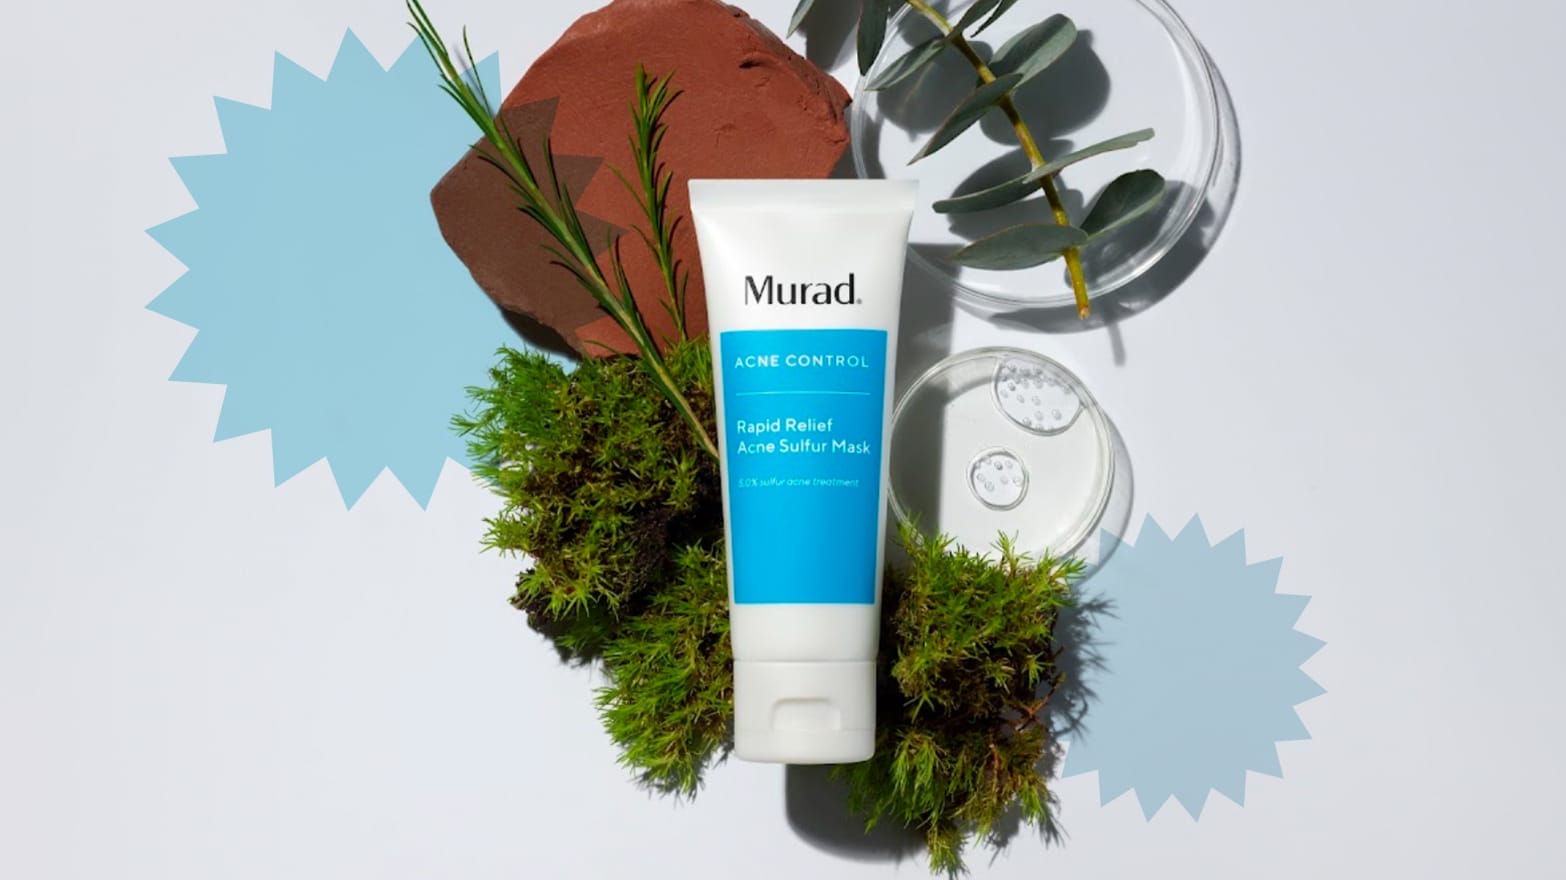 Murad Rapid Relief Sulfur Mask for Acne Review | The Daily Beast